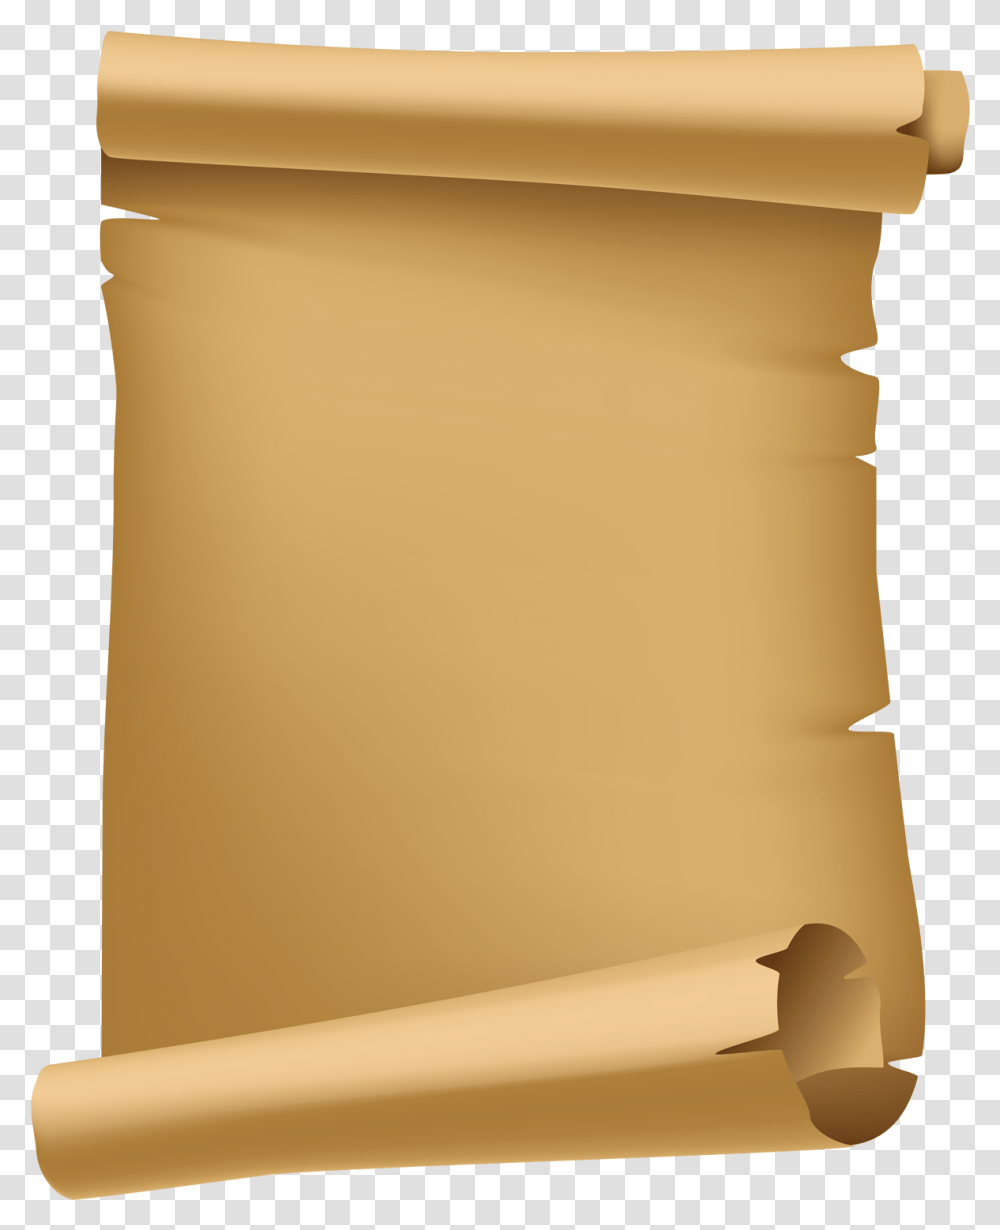 Image With No Pergamino, Scroll, Mailbox, Letterbox Transparent Png